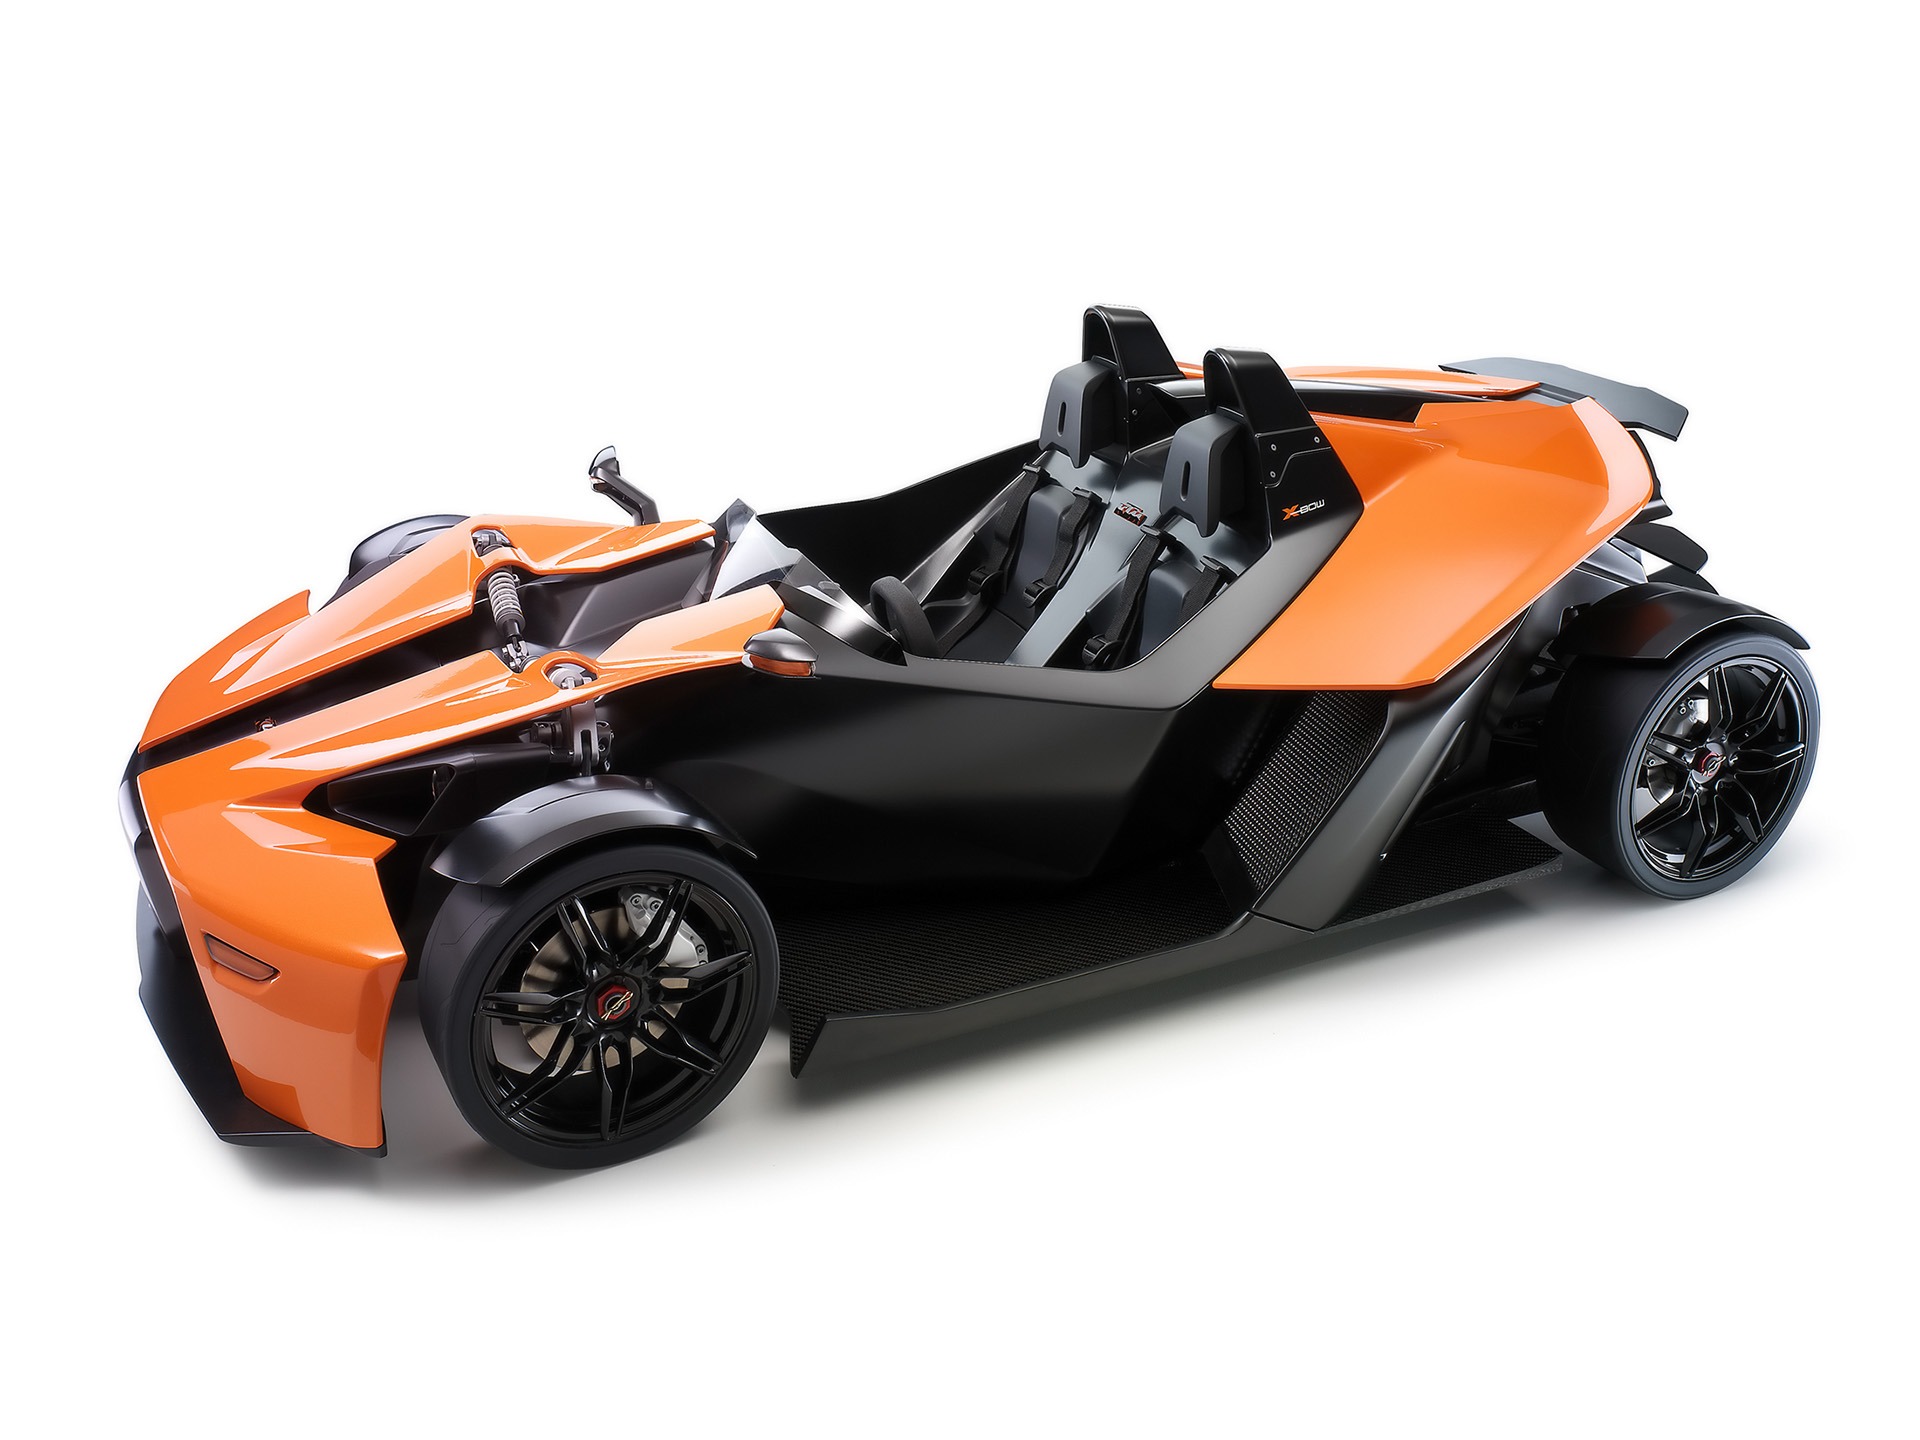 Ktm X Bow Wallpaper Concept Cars Wallpapers In Jpg Format For Free Download